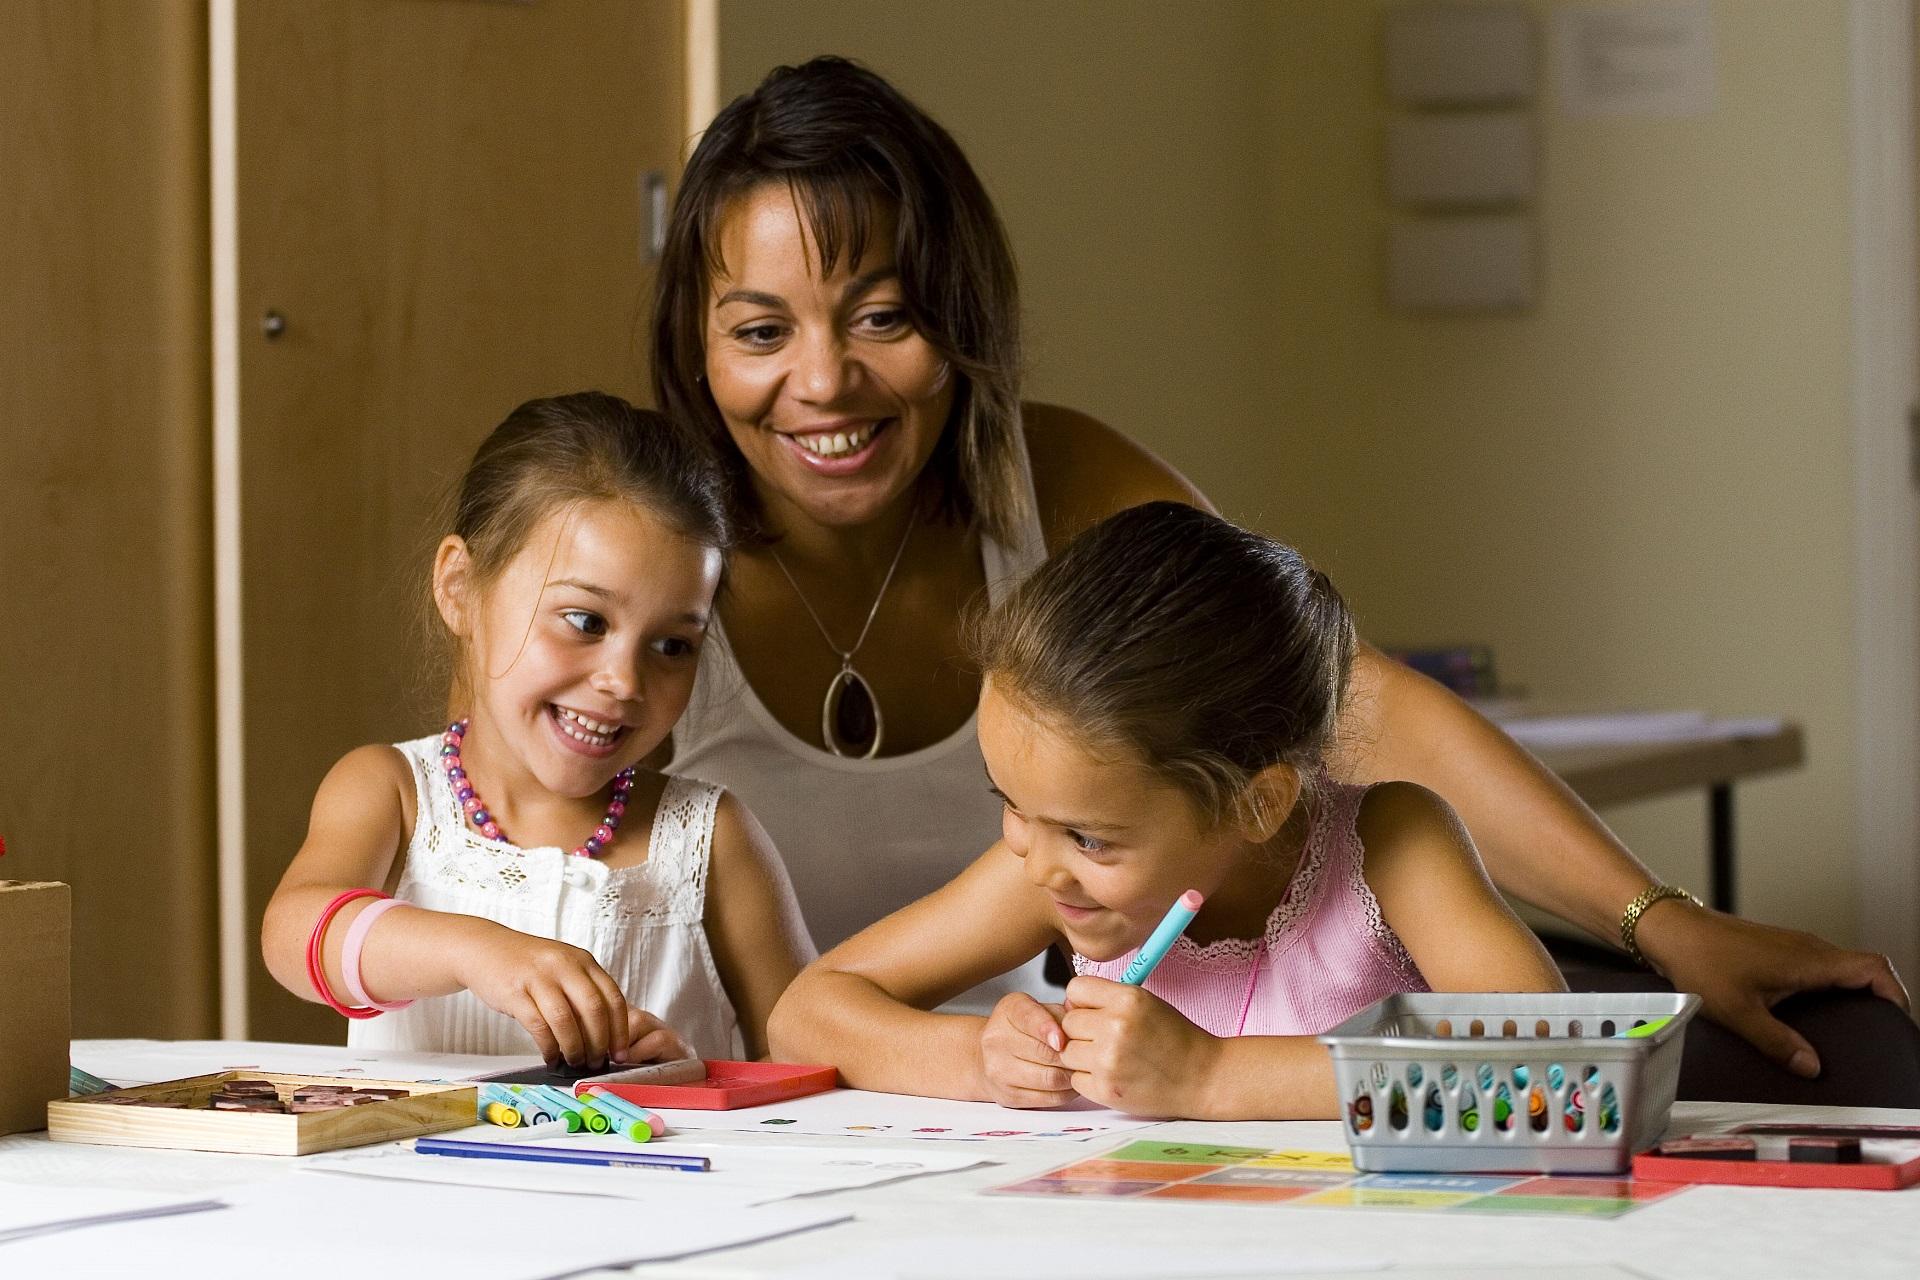 A woman and two children taking part in a craft activity.